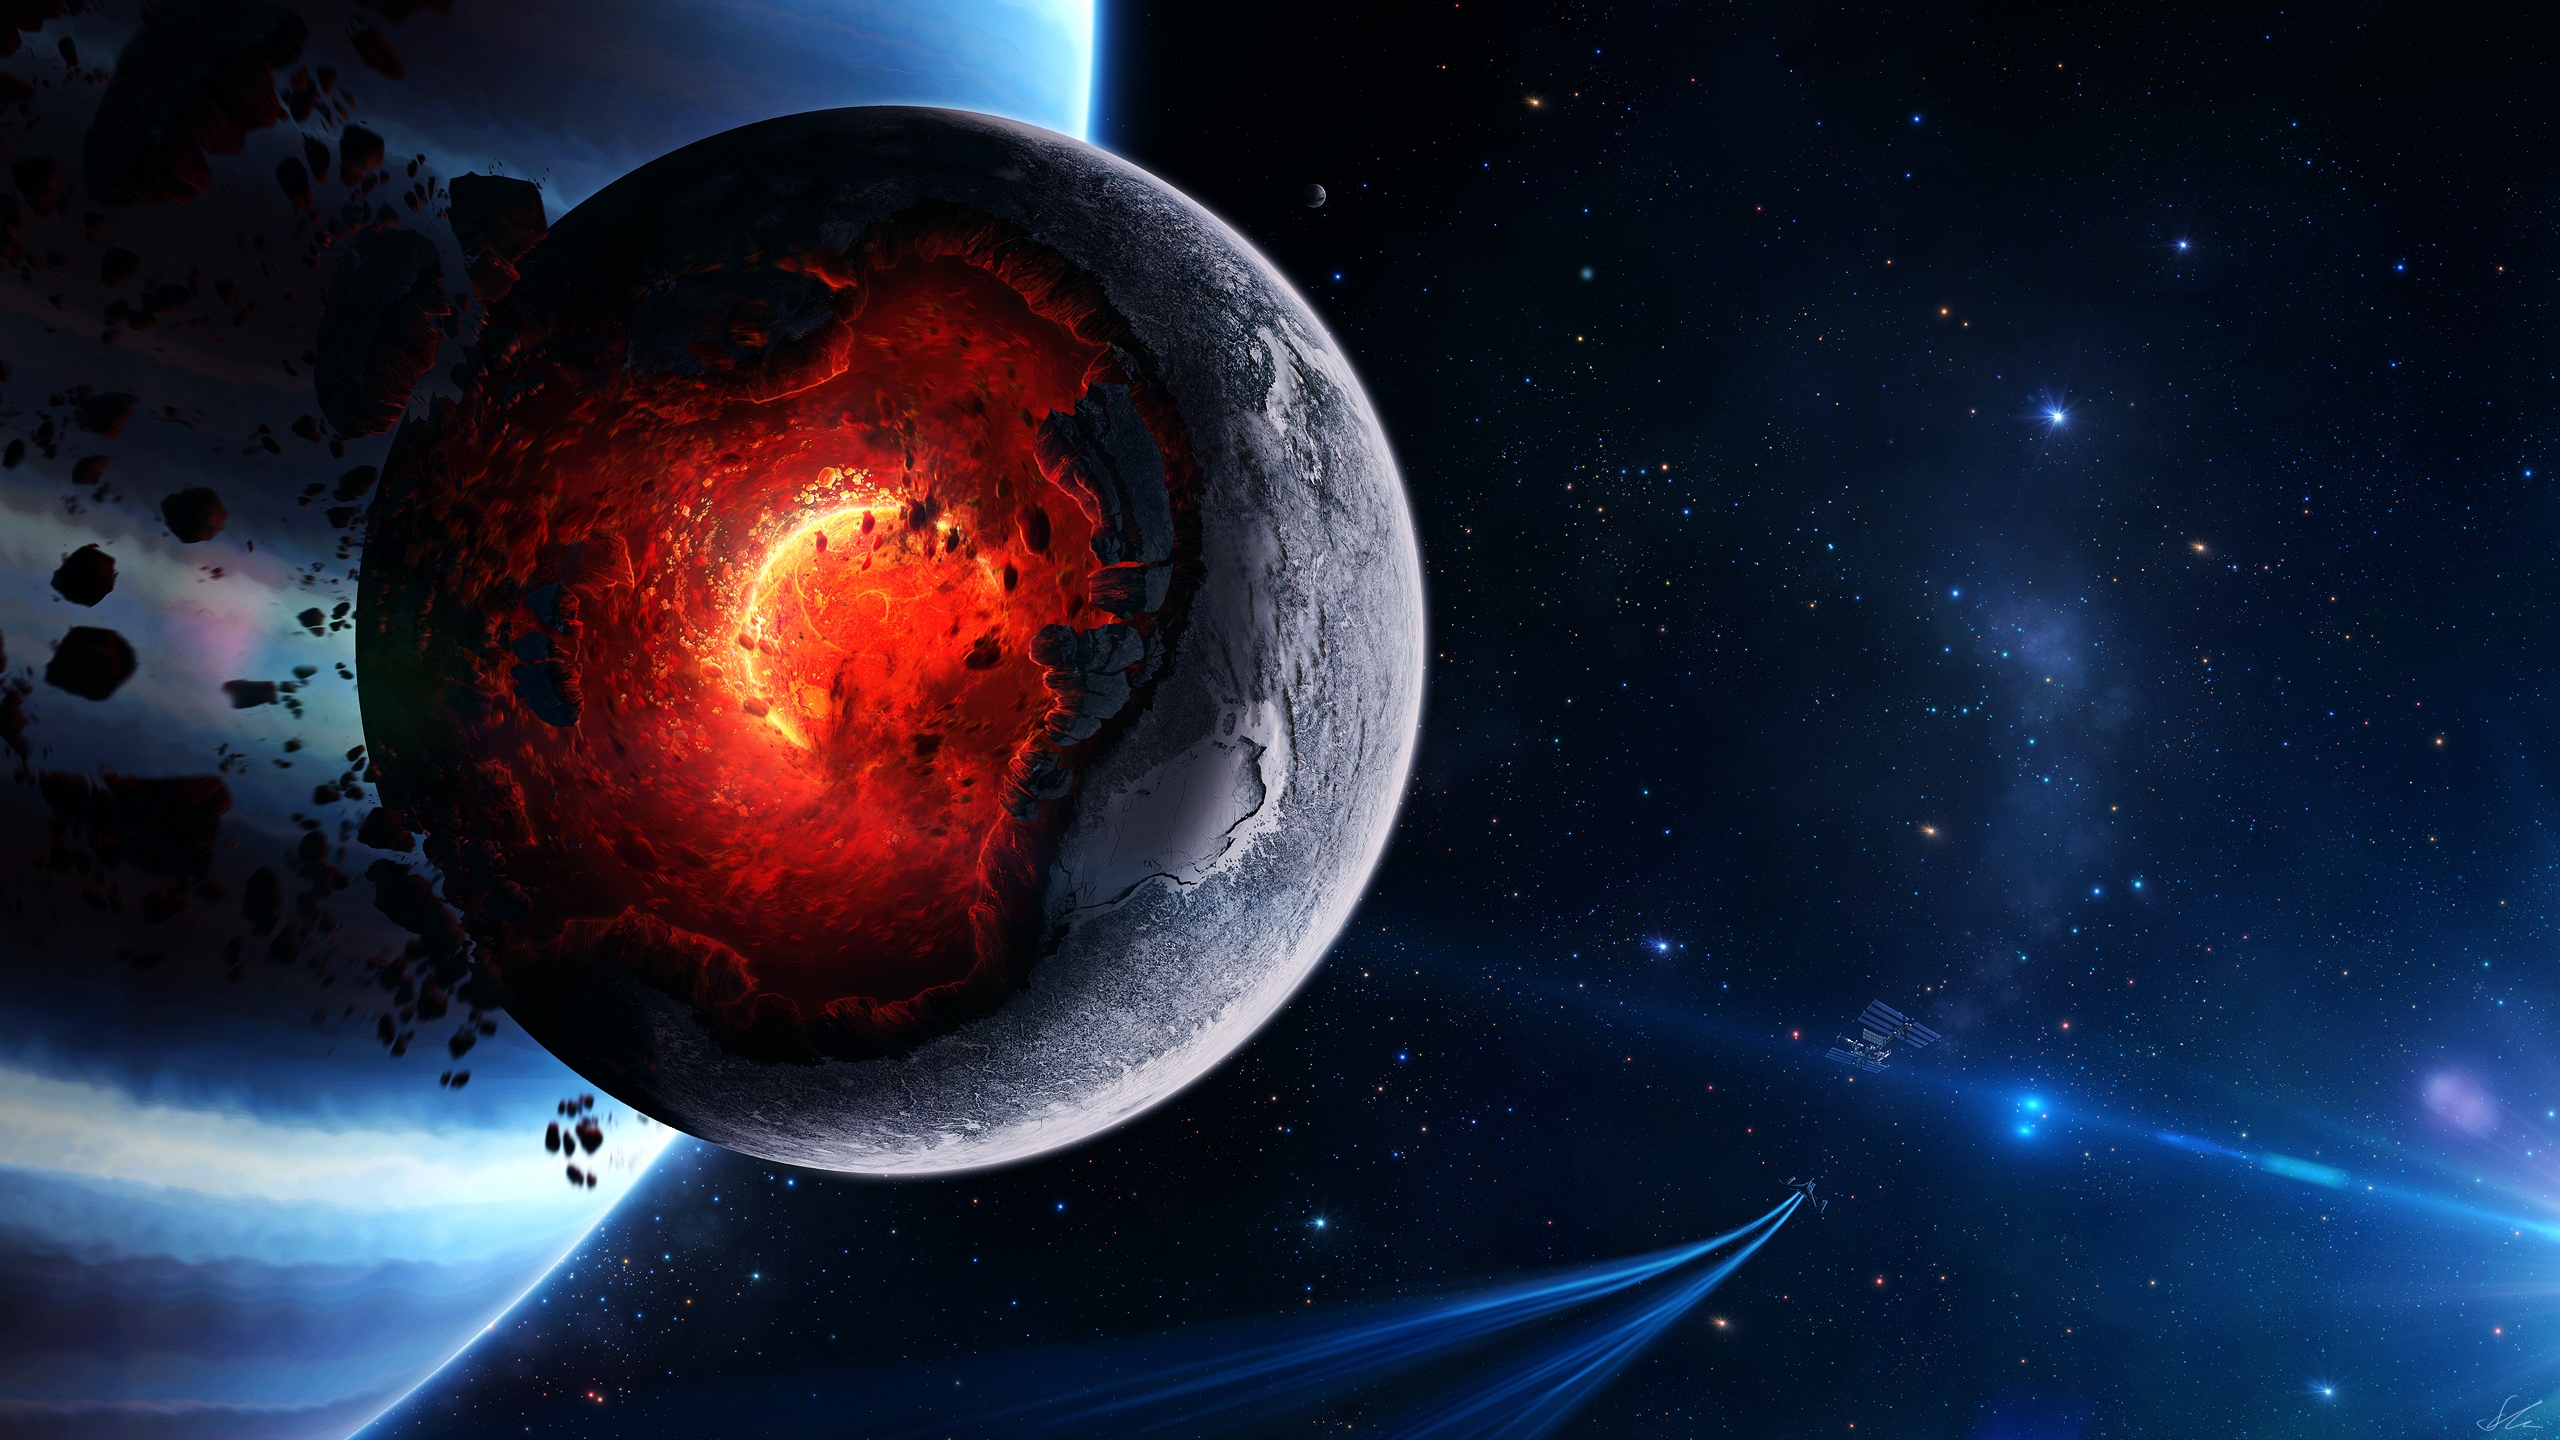 Space Planet Disaster for 2560x1440 HDTV resolution